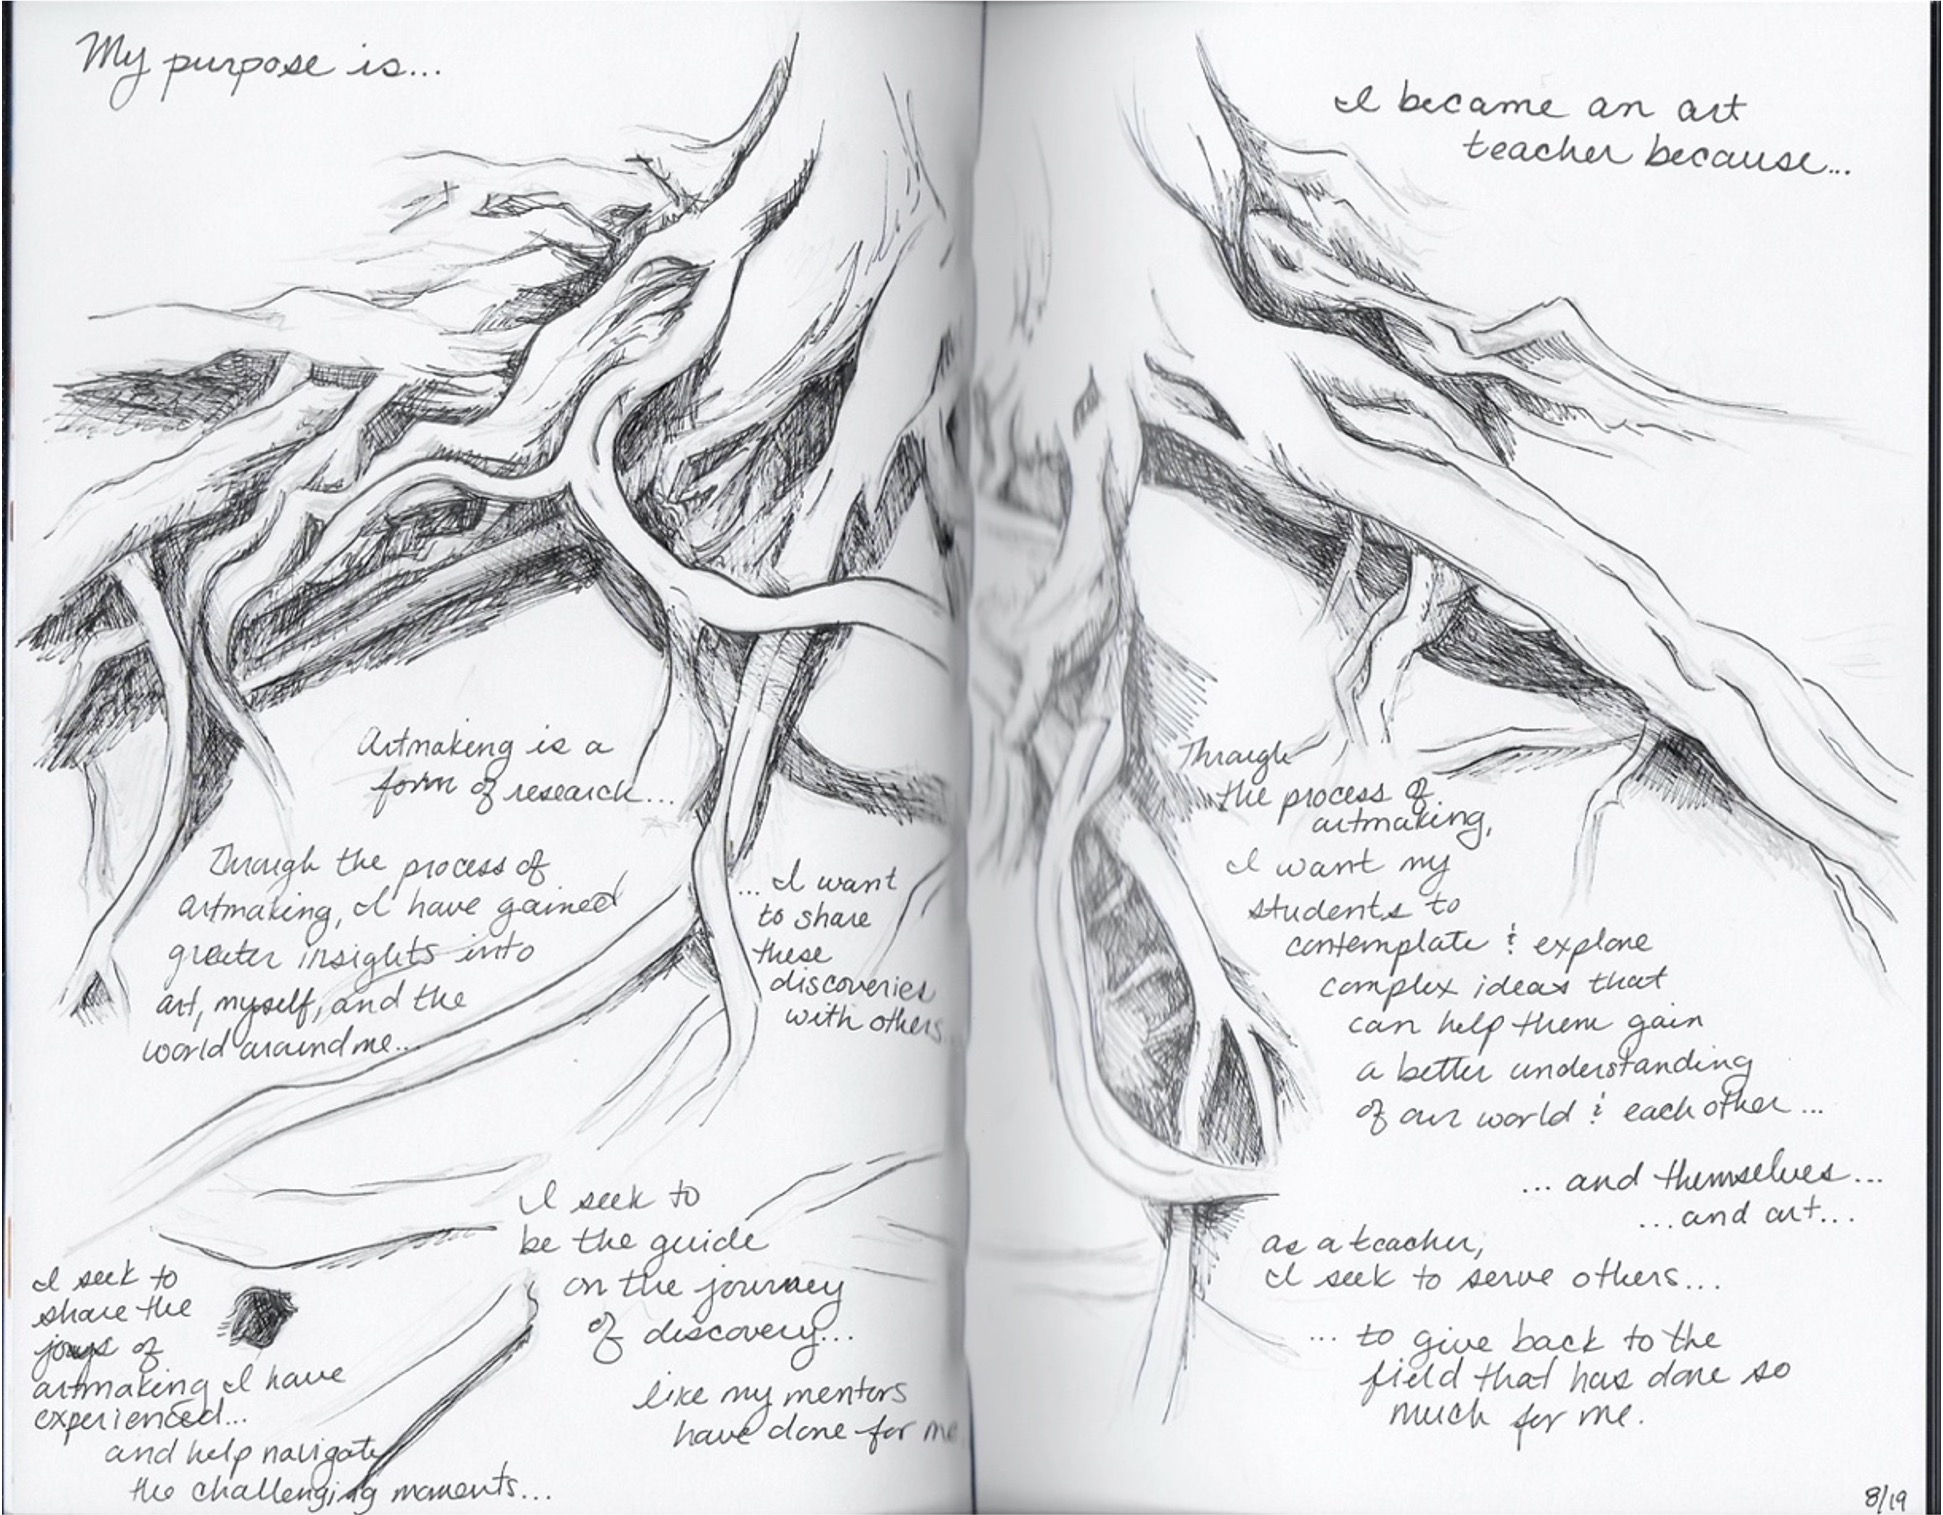 page from Alexa Kulinski's diary which includes a drawing of a tree and explores her purpose and why she became an art teacher